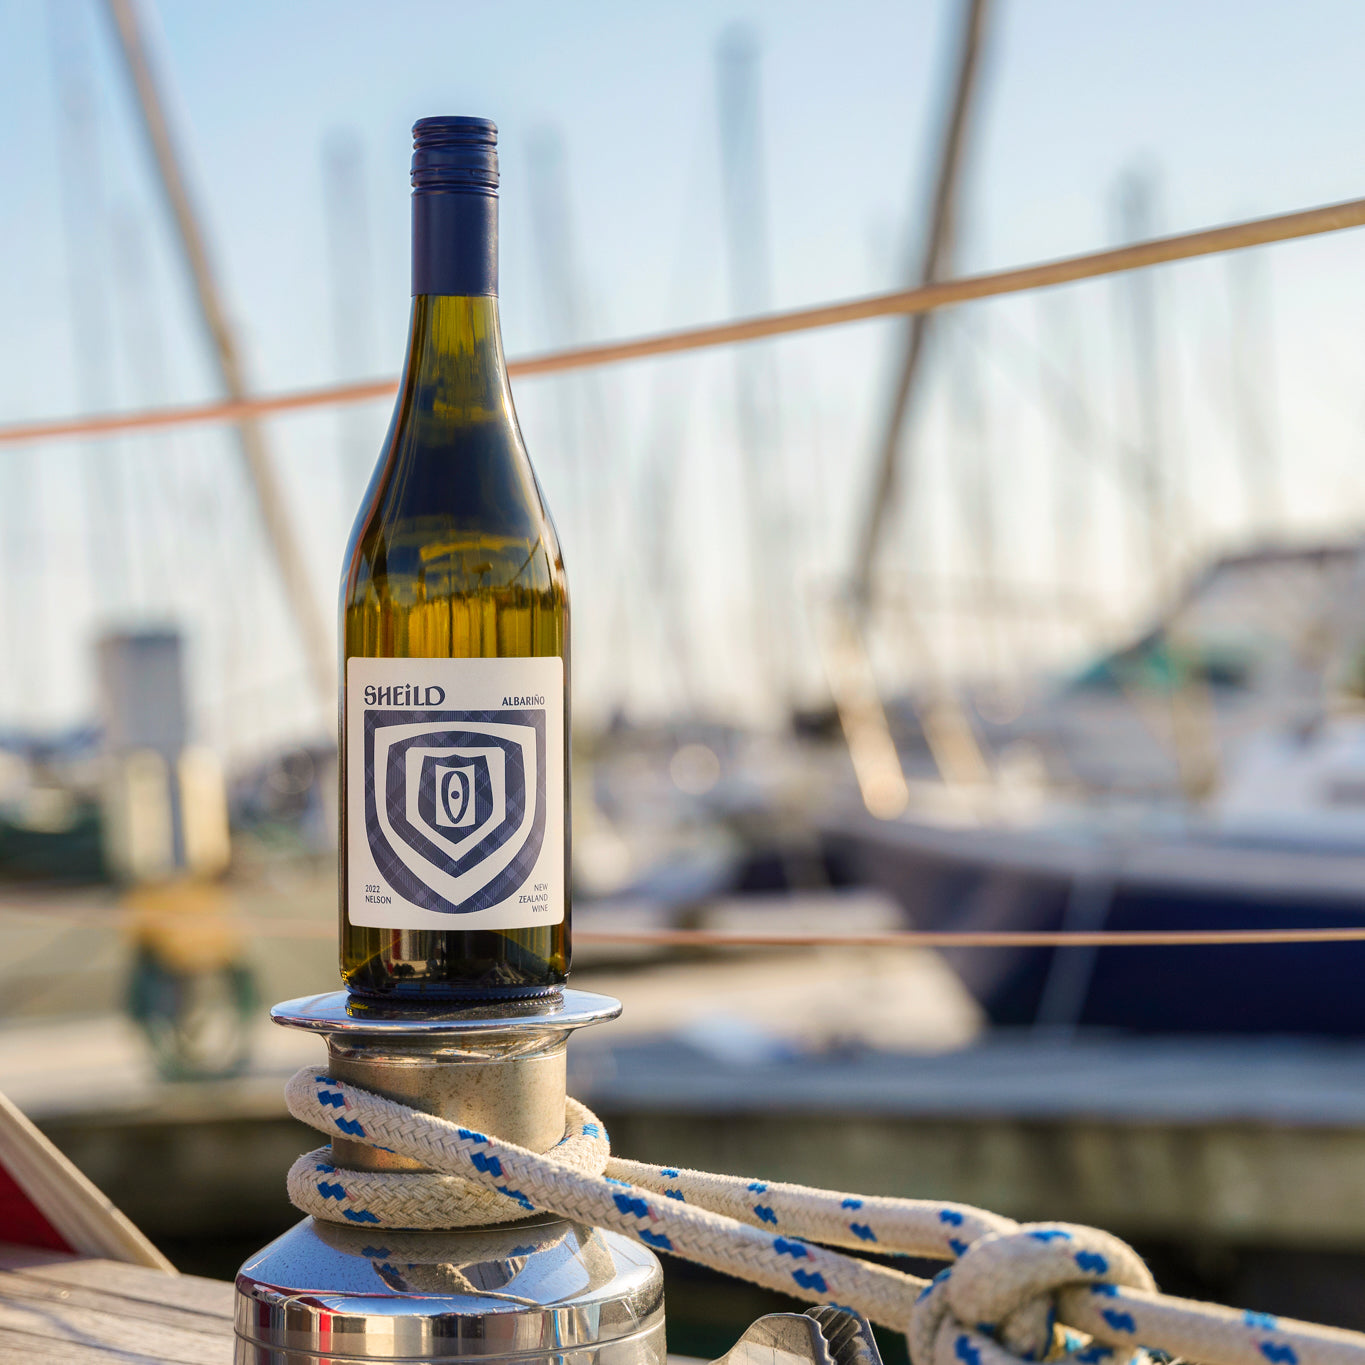 SHEiLD's Albariño wine placed on a marina mooring on a sunny day.